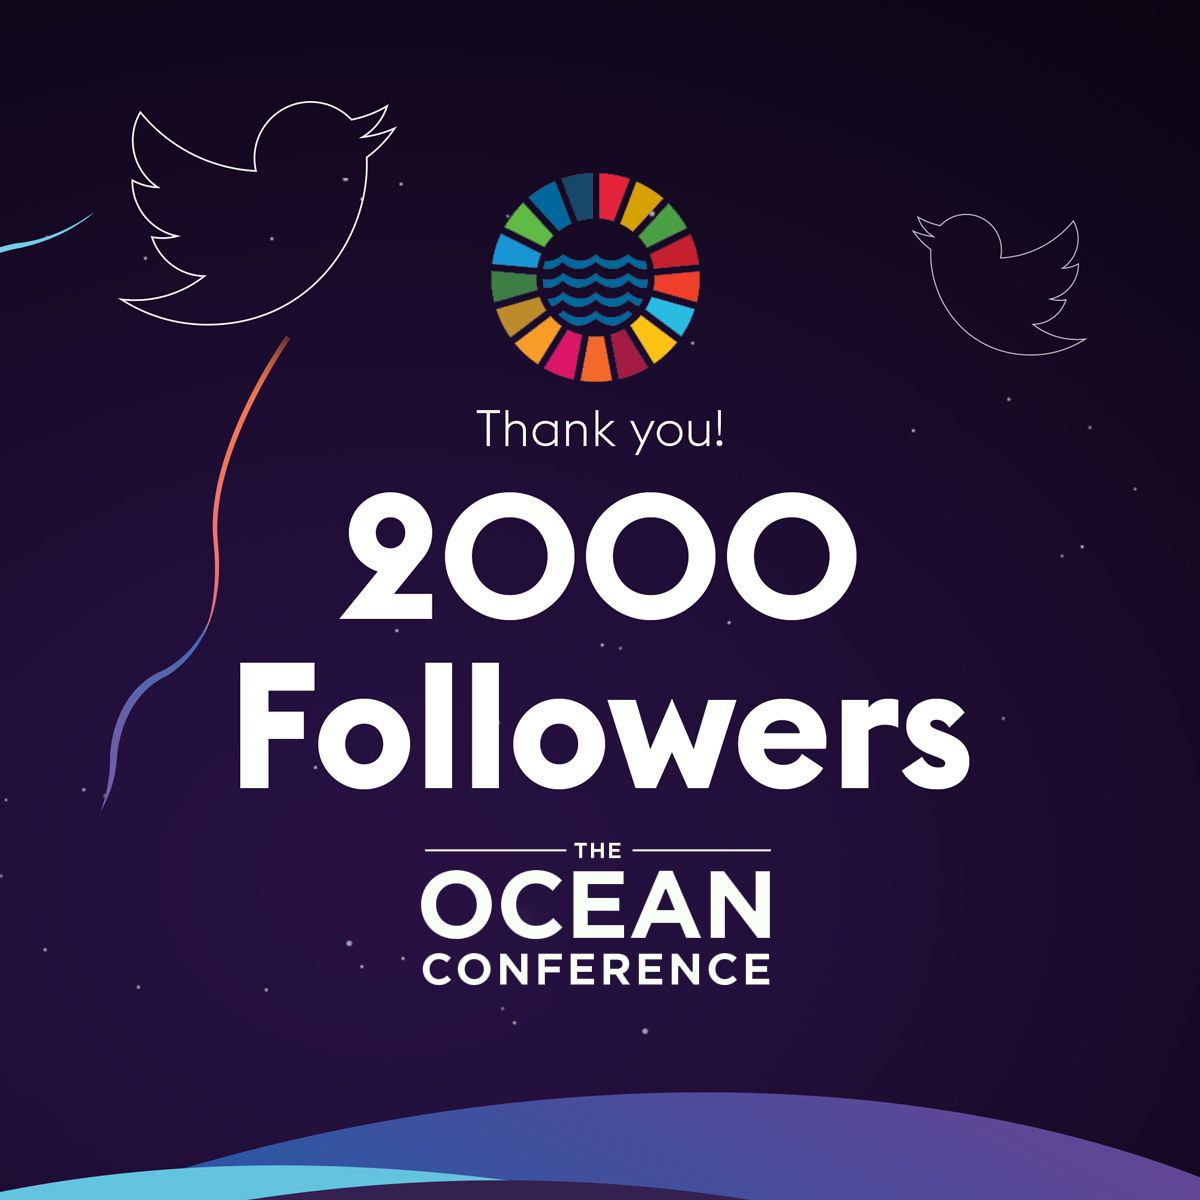 On #WorldOceansDay, We've just hit 2000 followers!
Thank you to each & every one of you for your support to #OurOceans 🌏 here's to many more milestones in the future!